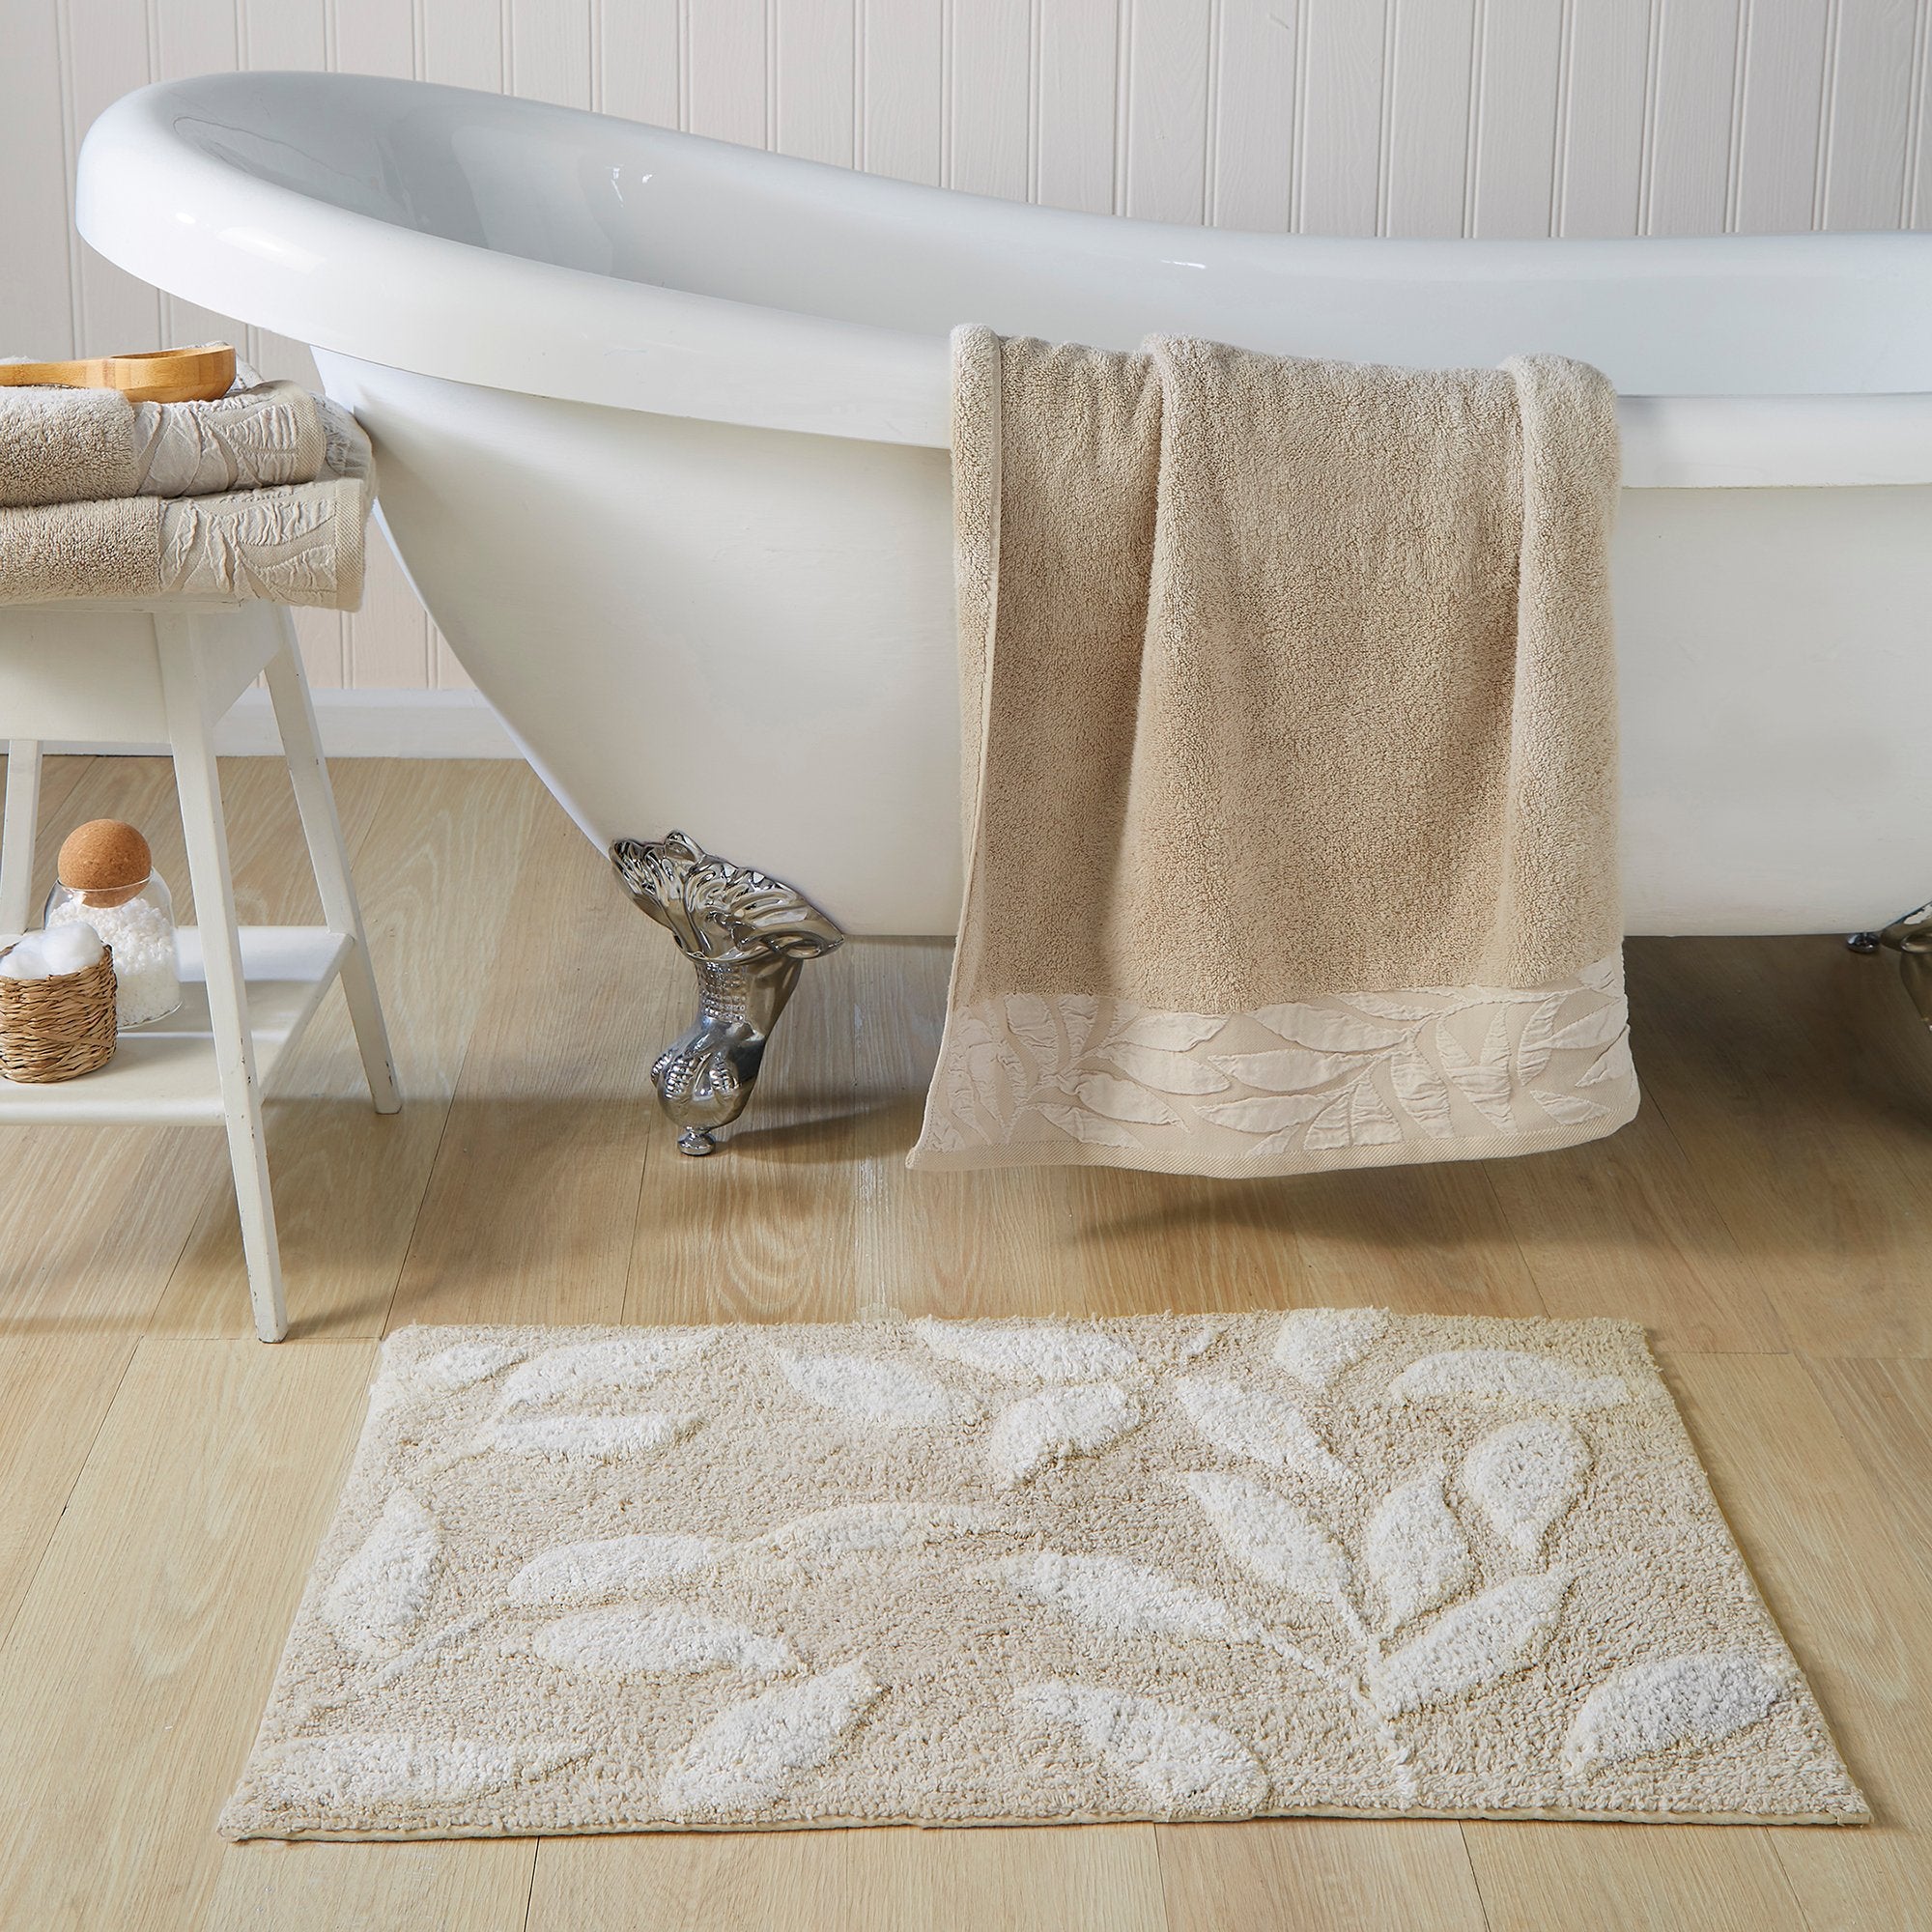 Towels Lacie by Dreams & Drapes Bathroom in Natural